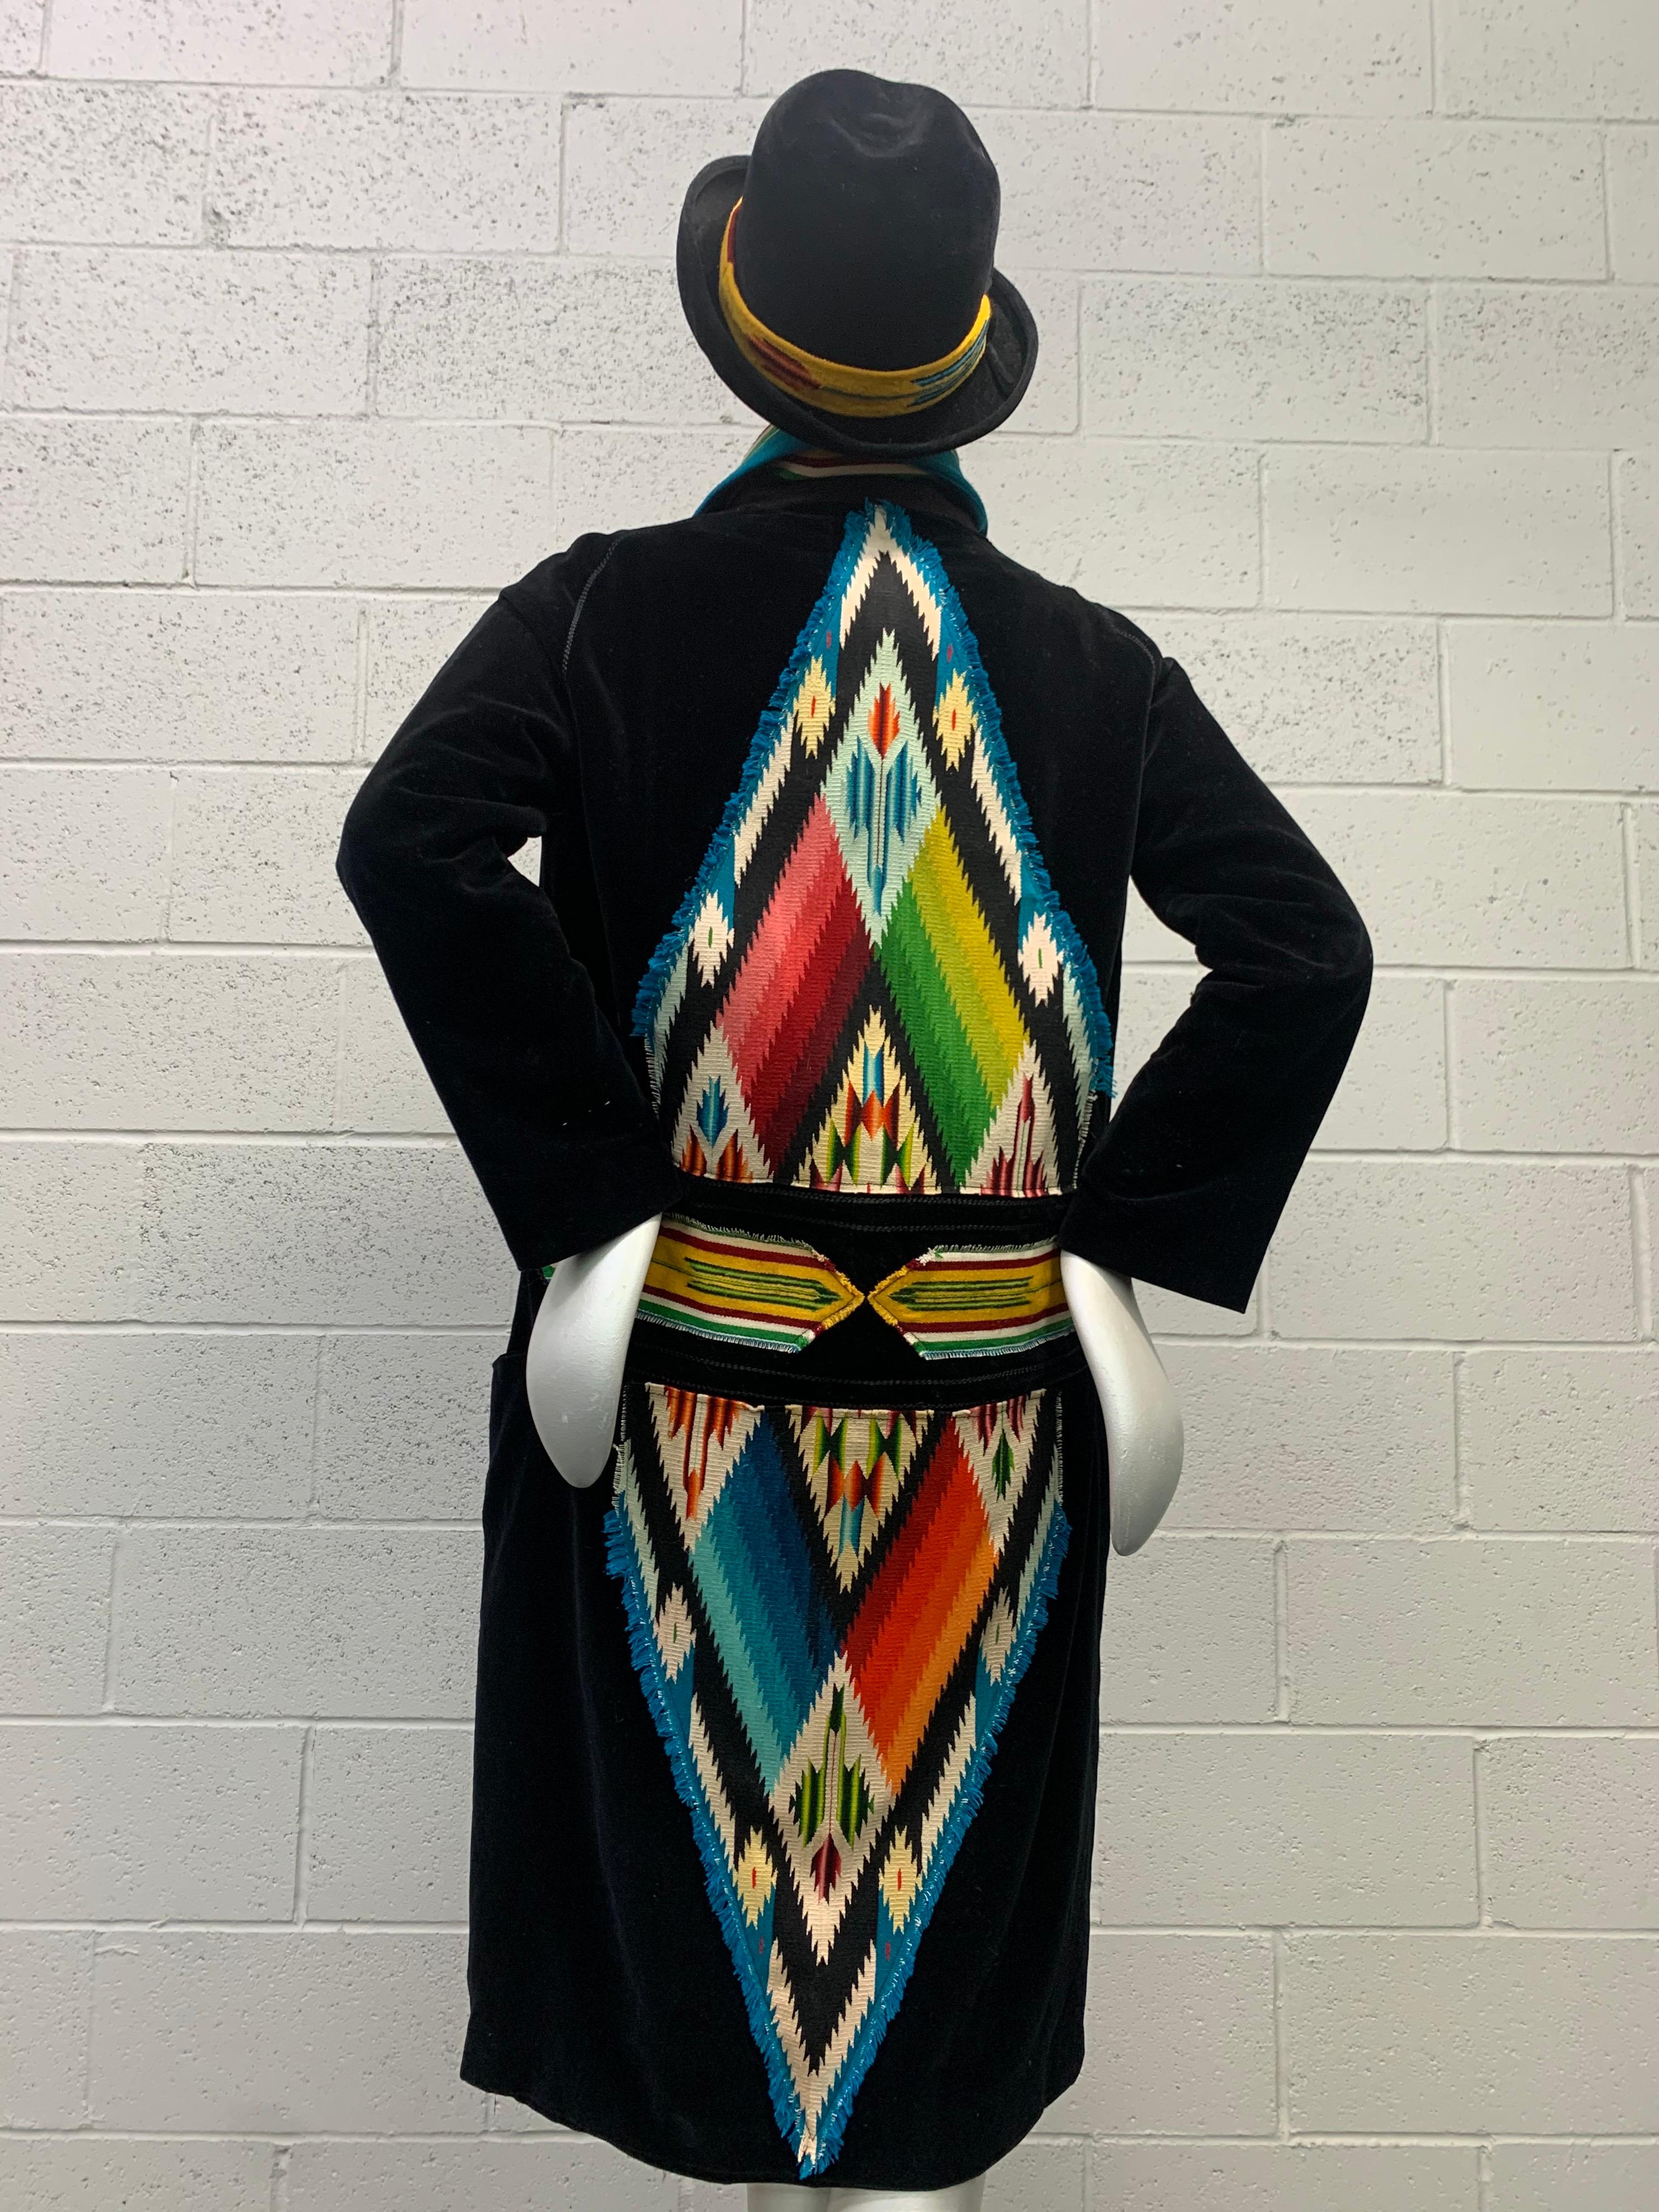 A Torso Creations Art Deco-inspired 1920s dropped-waist, velvet car coat and matching black felt fedora, embellished with vintage Chimayo hand-woven blanket appliques and hatband. Kimono tie-style wrap closure with interior tie and button and loop